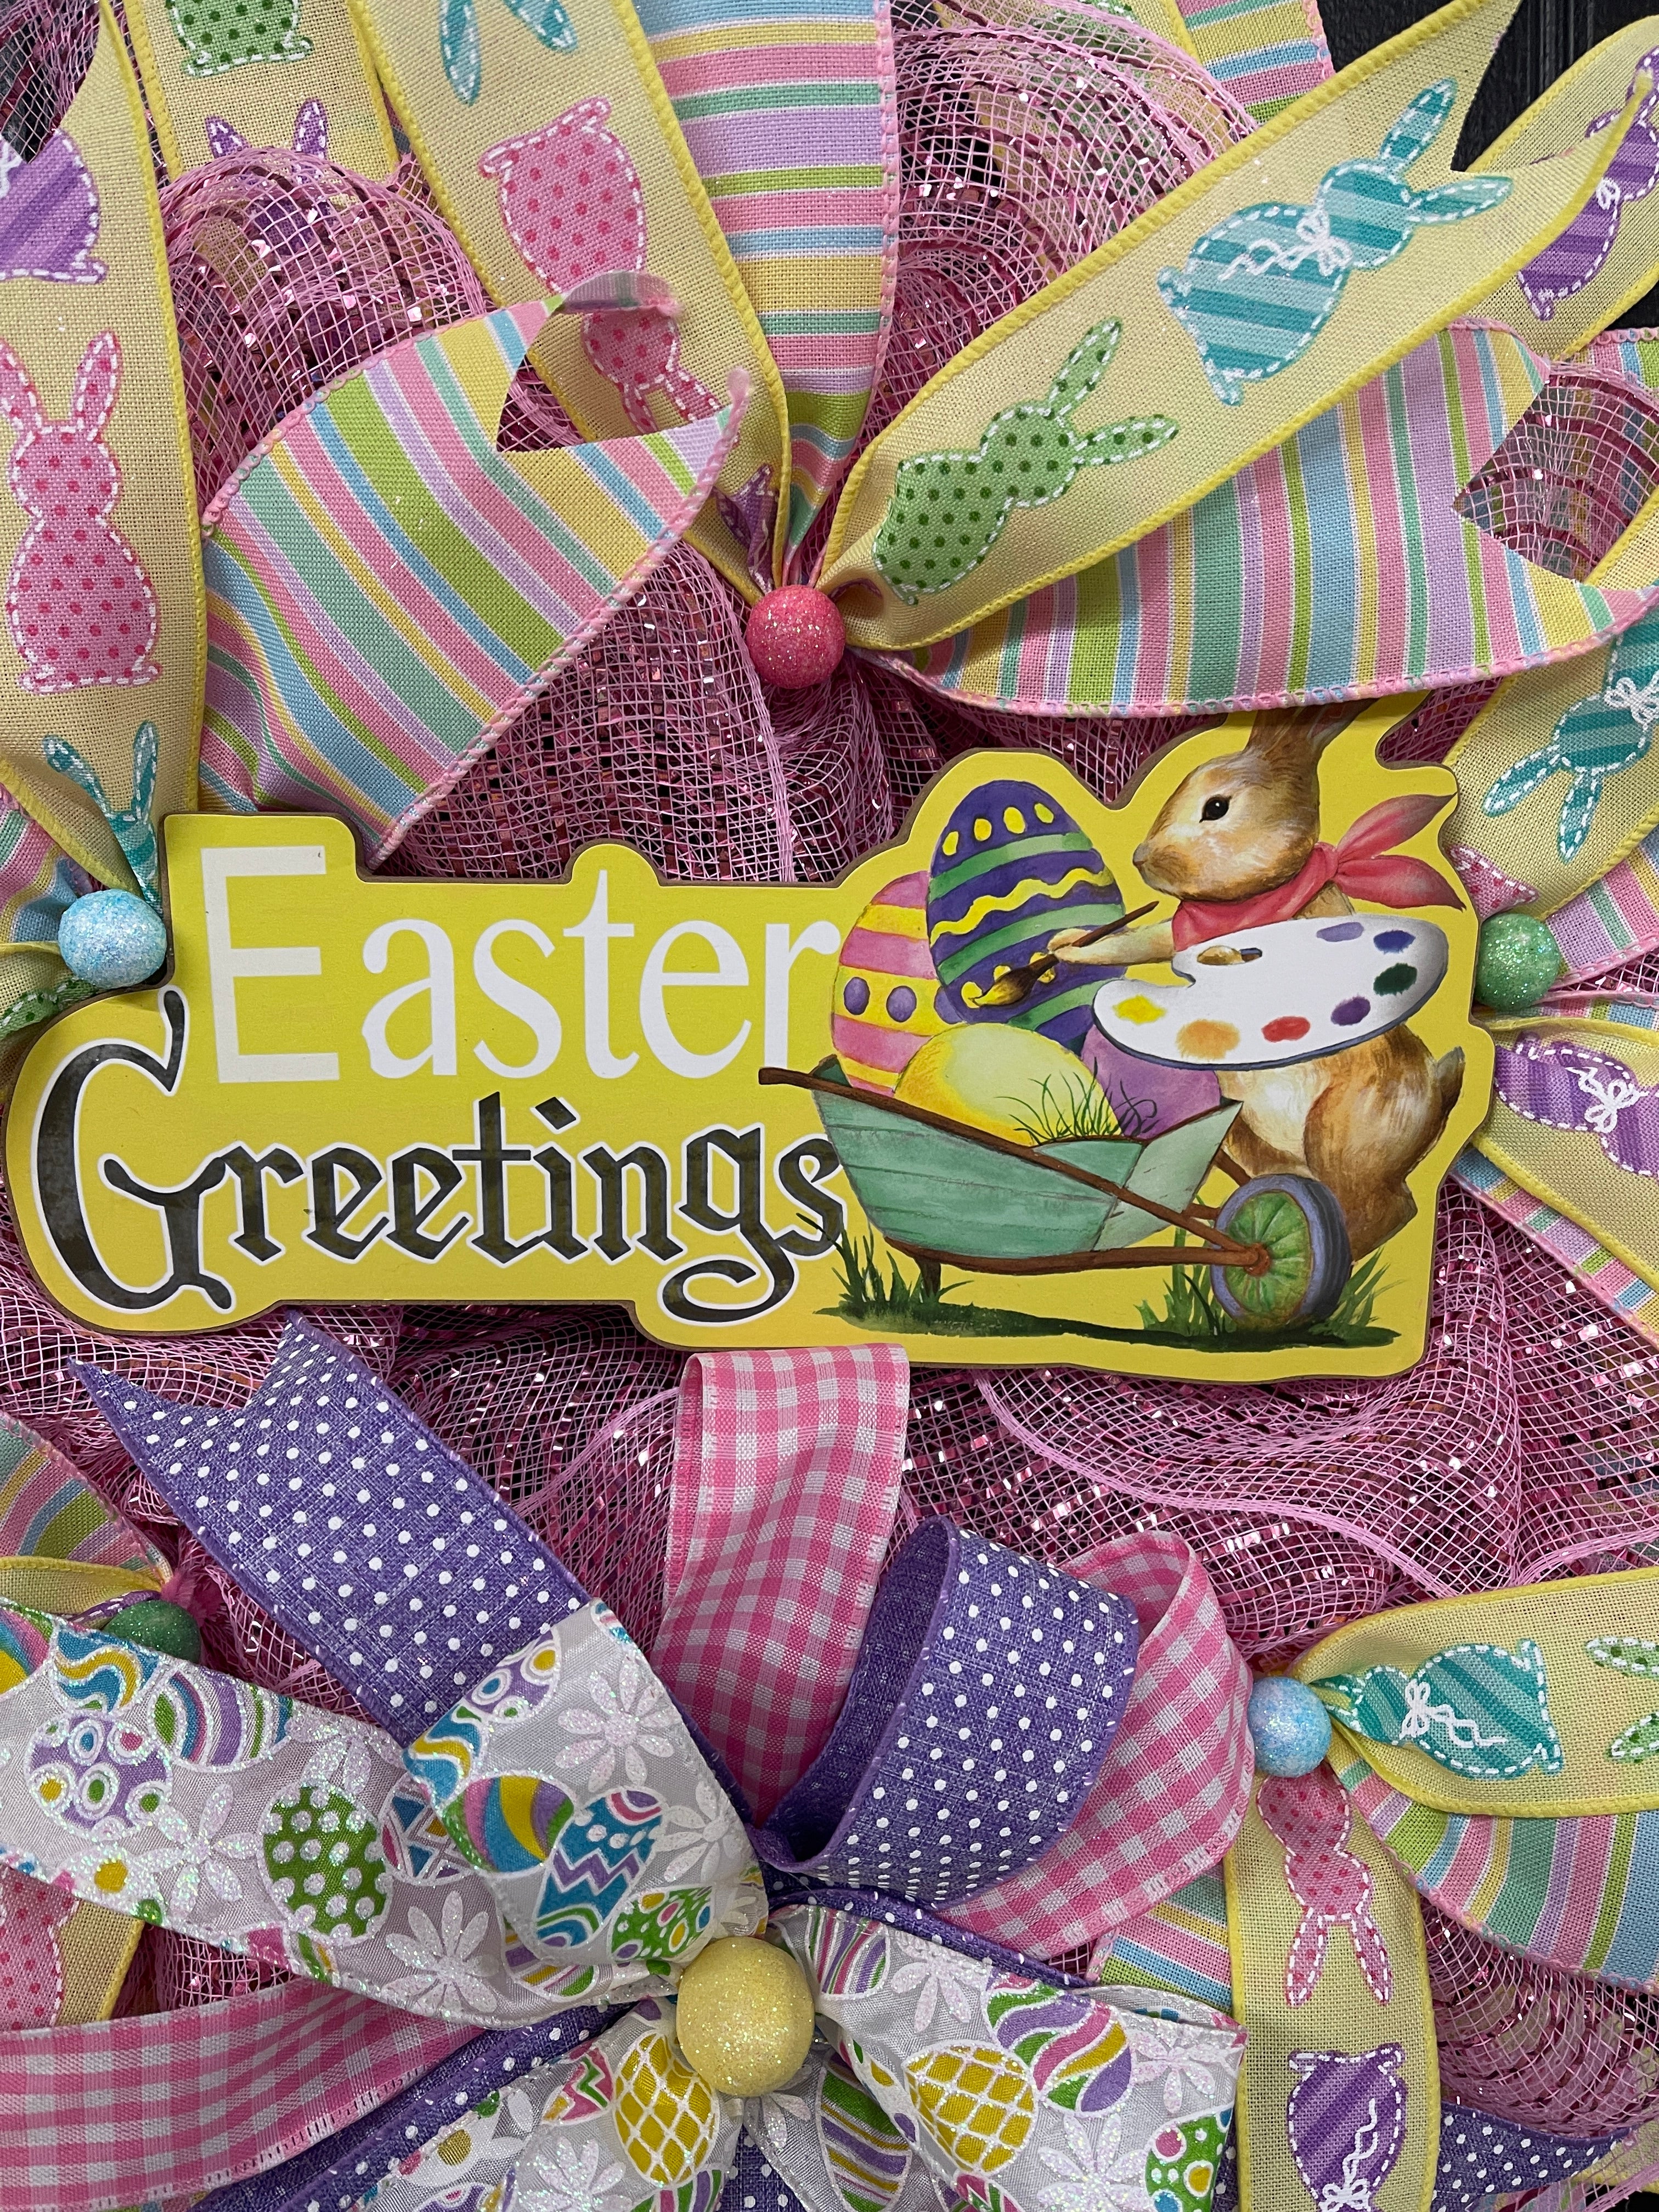 Close up of Easter Greetings Sign with Easter Bunny Holding a Paint Palette painting Easter Eggs in a Wheelbarrow